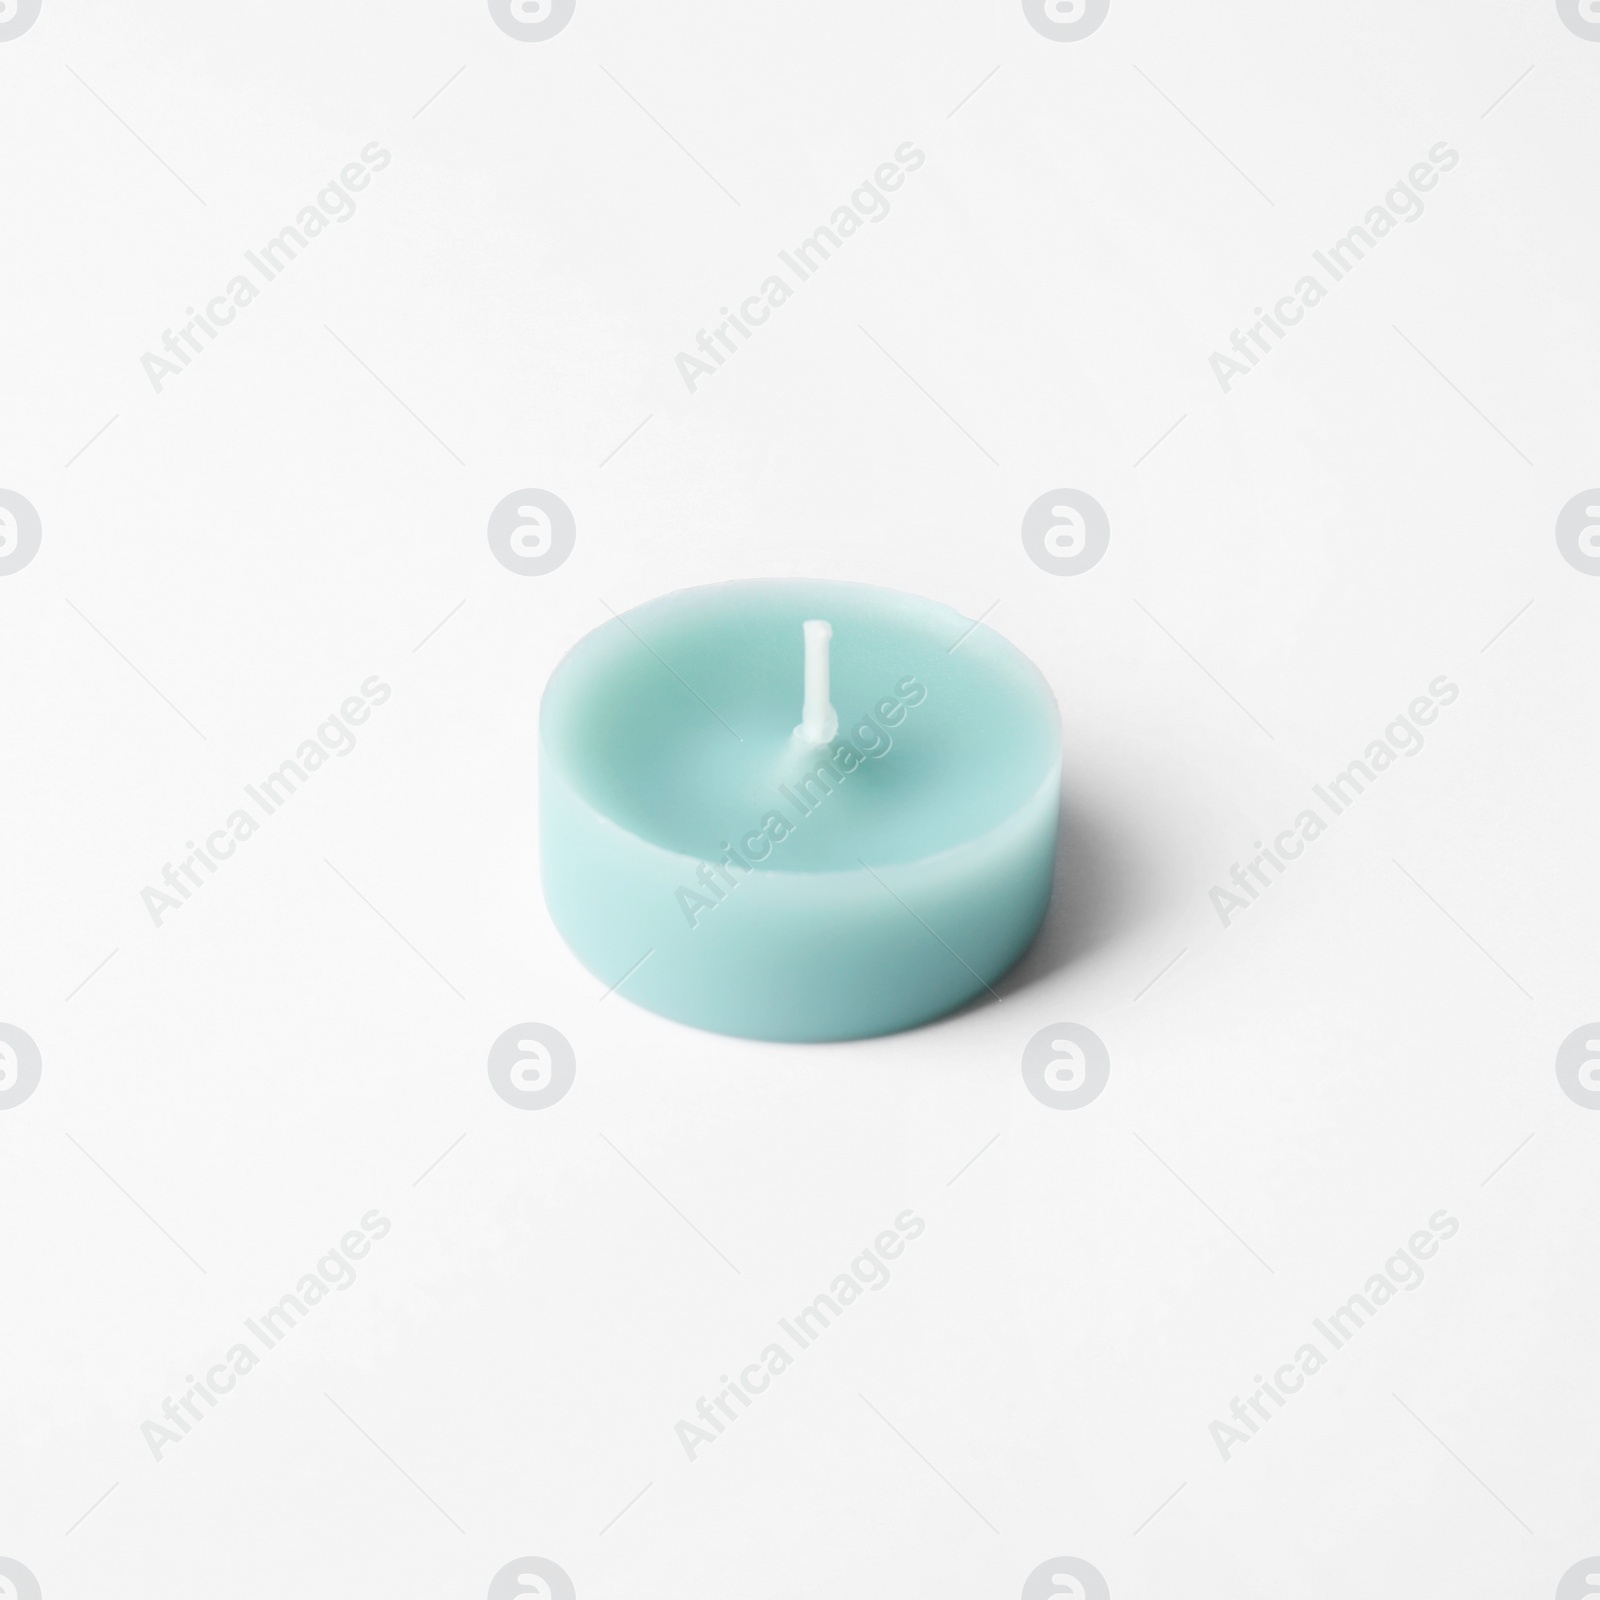 Photo of Light blue wax decorative candle isolated on white